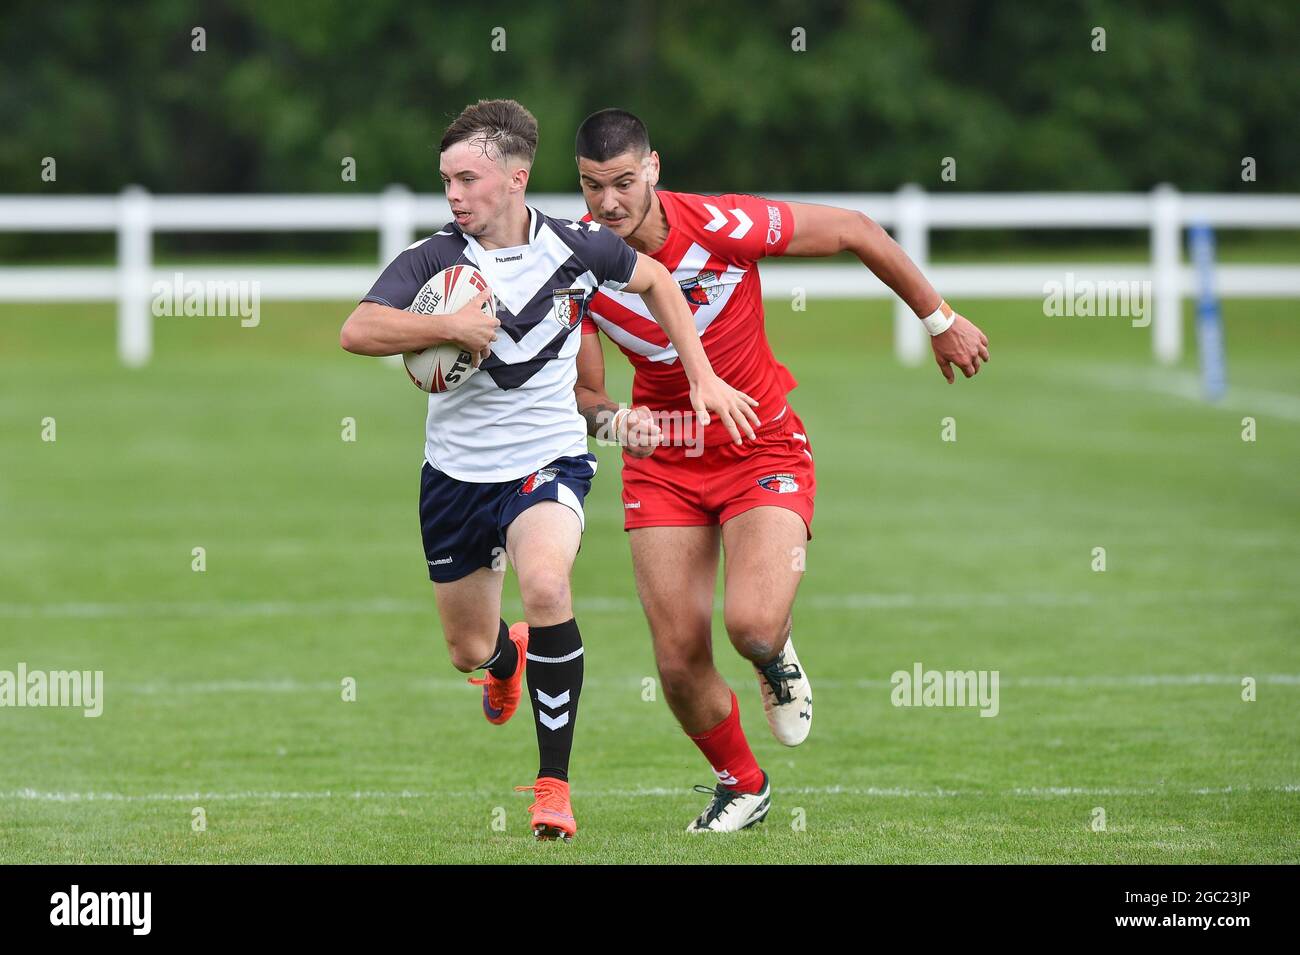 Leeds, England - 4 August 2021 - Lewis Camden (Bradford Bulls) of Yorkshire Academy scores a try during the Rugby League Roses Academy Match Yorkshire Academy vs Lancashire Academy at Weetwood Hall, Leeds, UK  Dean Williams Stock Photo